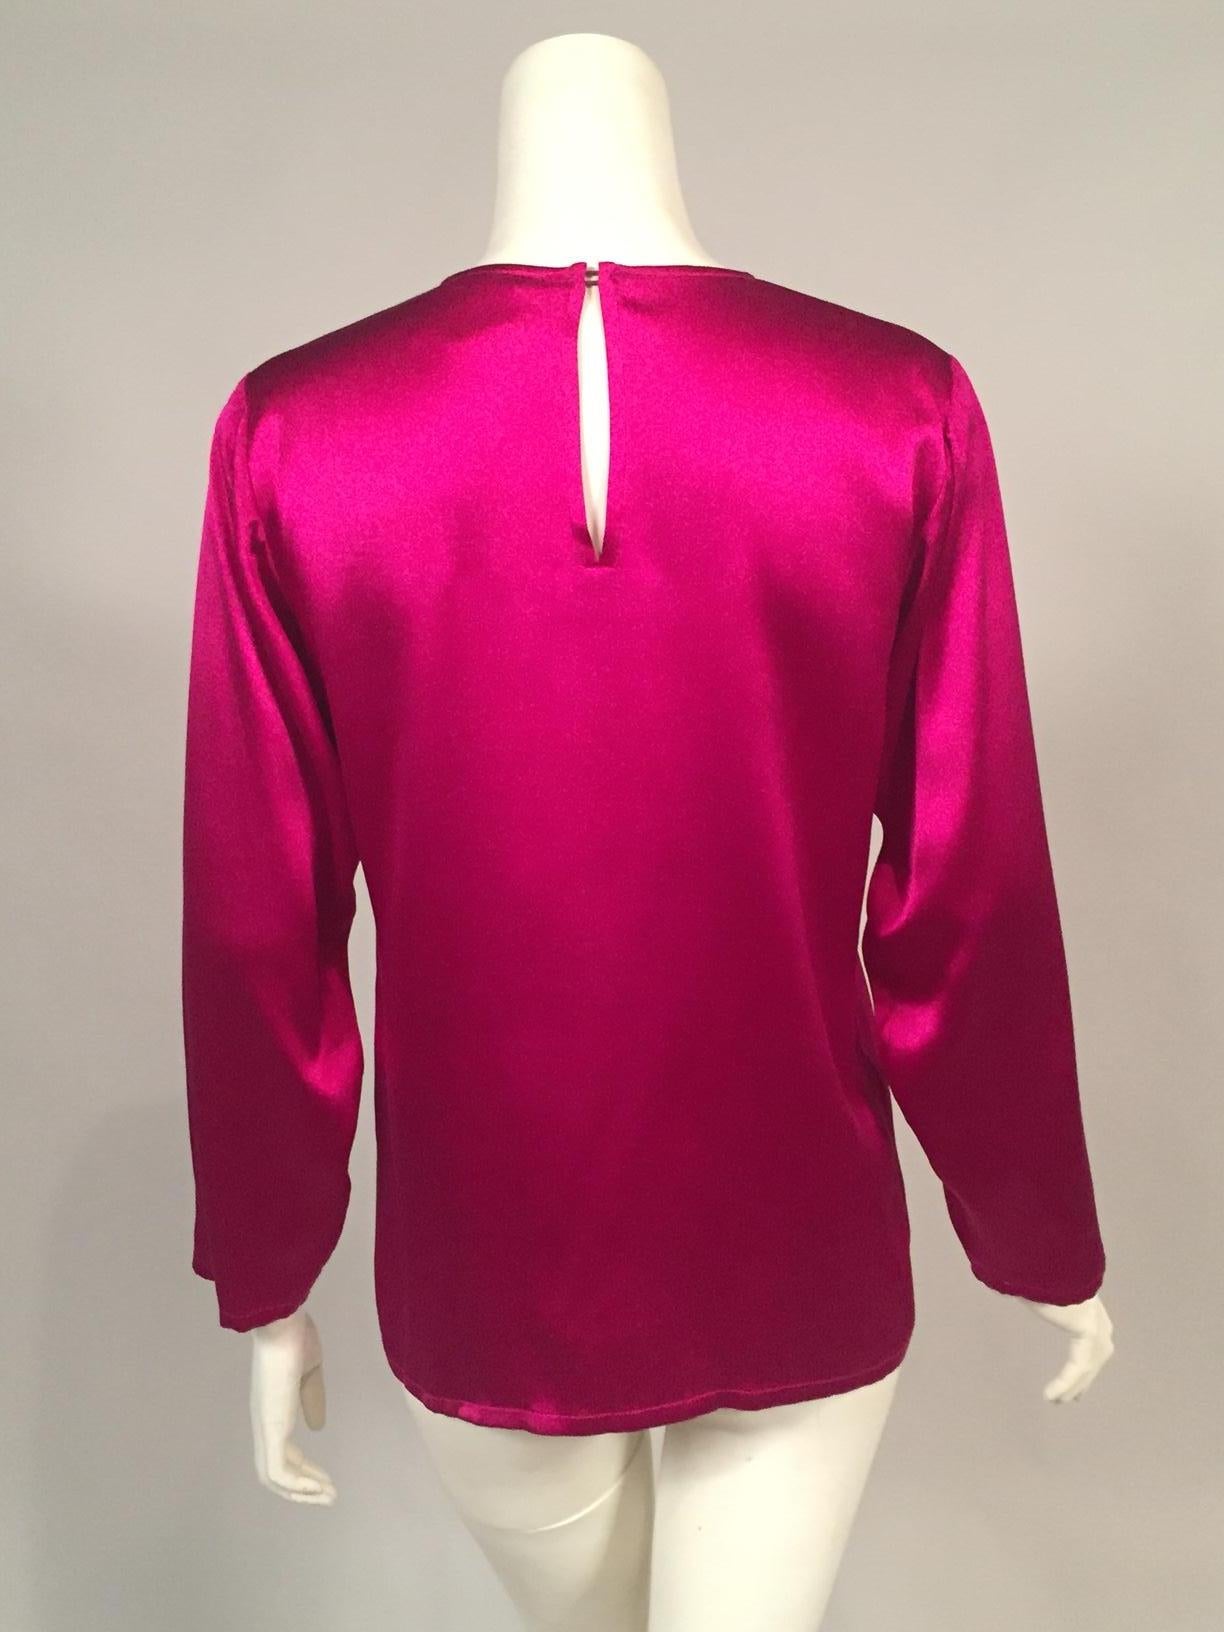 Yves Saint Laurent Cyclamen Pink Silk Charmeuse Blouse In Excellent Condition For Sale In New Hope, PA